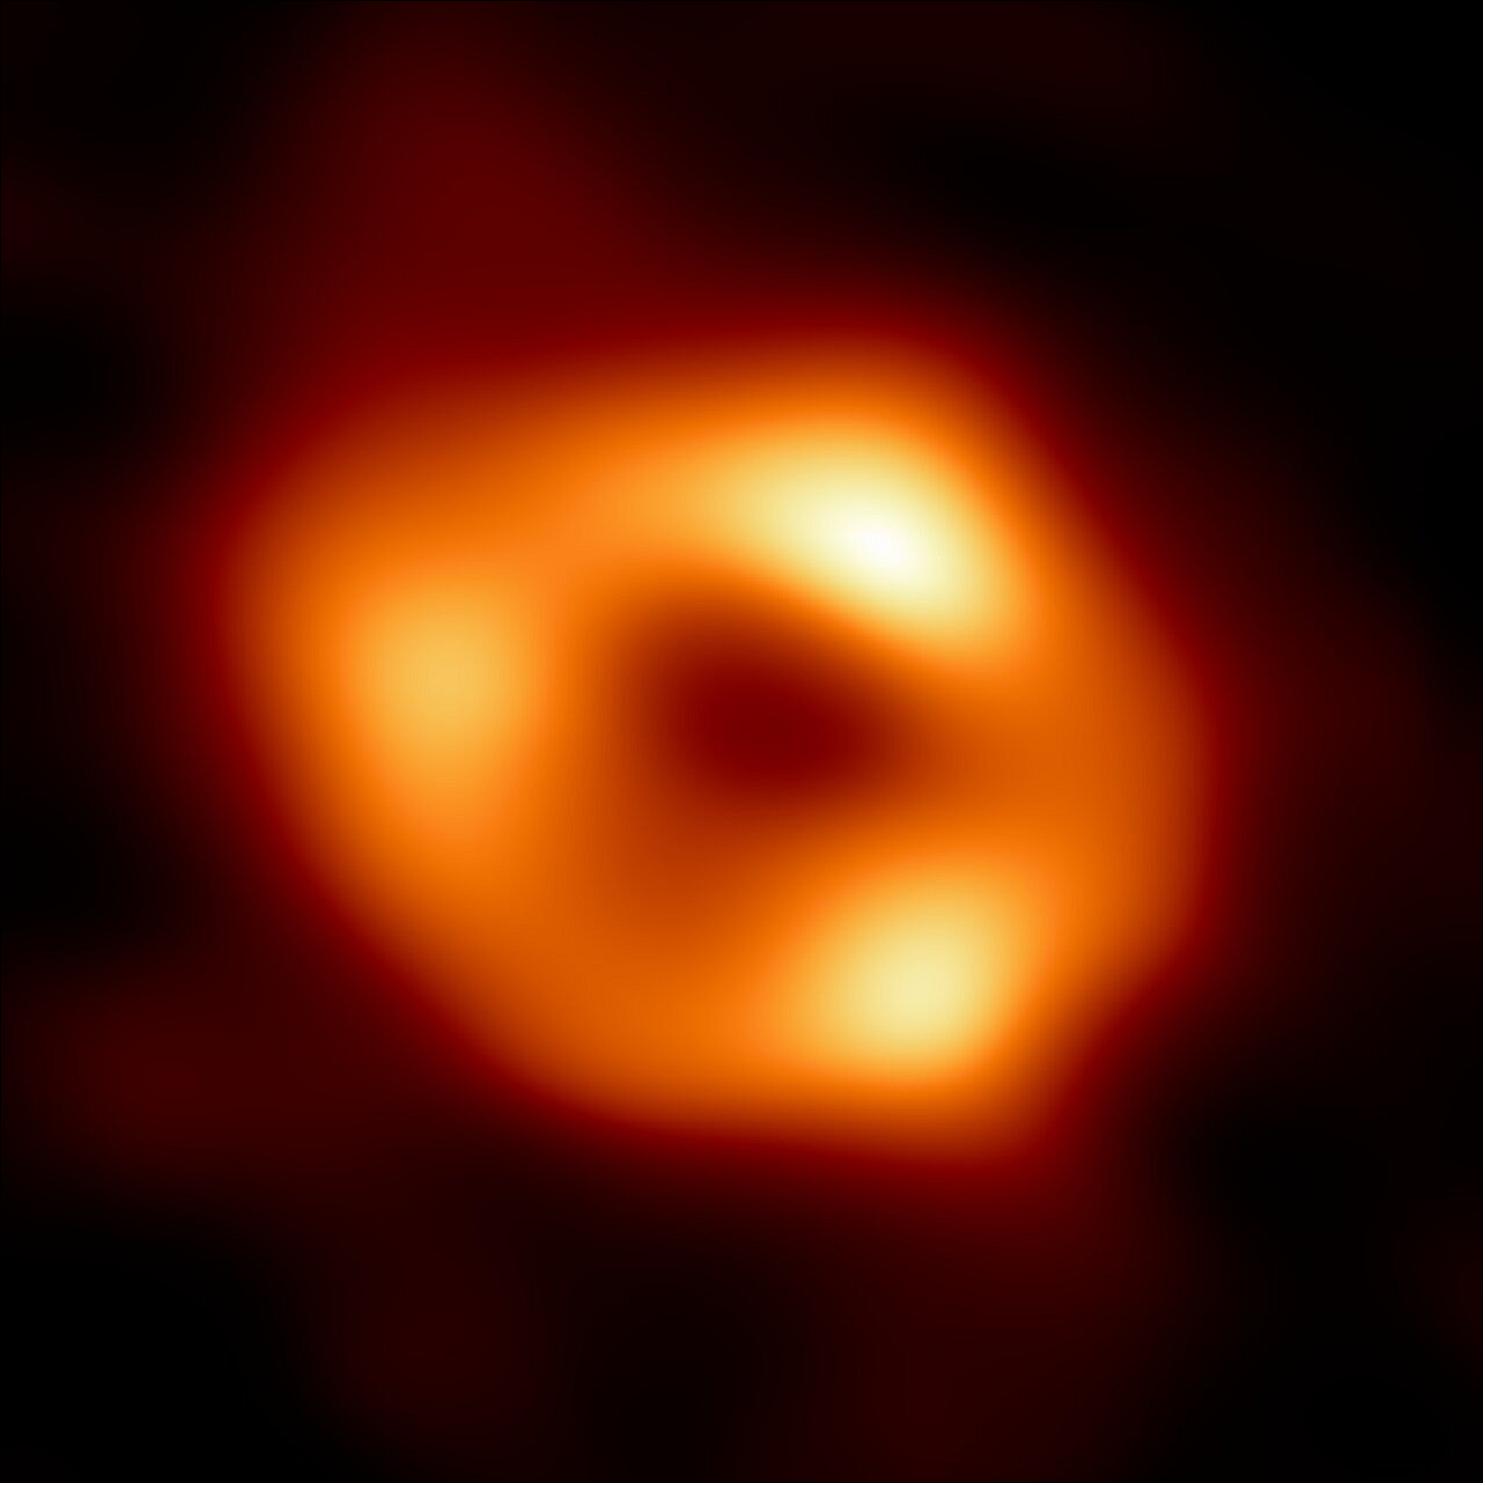 Figure 21: This is the first image of Sgr A*, the supermassive black hole at the centre of our galaxy. It’s the first direct visual evidence of the presence of this black hole. It was captured by the Event Horizon Telescope (EHT), an array which linked together eight existing radio observatories across the planet to form a single “Earth-sized” virtual telescope. The telescope is named after the event horizon, the boundary of the black hole beyond which no light can escape. - Although we cannot see the event horizon itself, because it cannot emit light, glowing gas orbiting around the black hole reveals a telltale signature: a dark central region (called a shadow) surrounded by a bright ring-like structure. The new view captures light bent by the powerful gravity of the black hole, which is four million times more massive than our Sun. The image of the Sgr A* black hole is an average of the different images the EHT Collaboration has extracted from its 2017 observations. - In addition to other facilities, the EHT network of radio observatories that made this image possible includes the Atacama Large Millimeter/submillimeter Array (ALMA) and the Atacama Pathfinder EXperiment (APEX) in the Atacama Desert in Chile, co-owned and co-operated by ESO is a partner on behalf of its member states in Europe (image credit: EHT Collaboration)